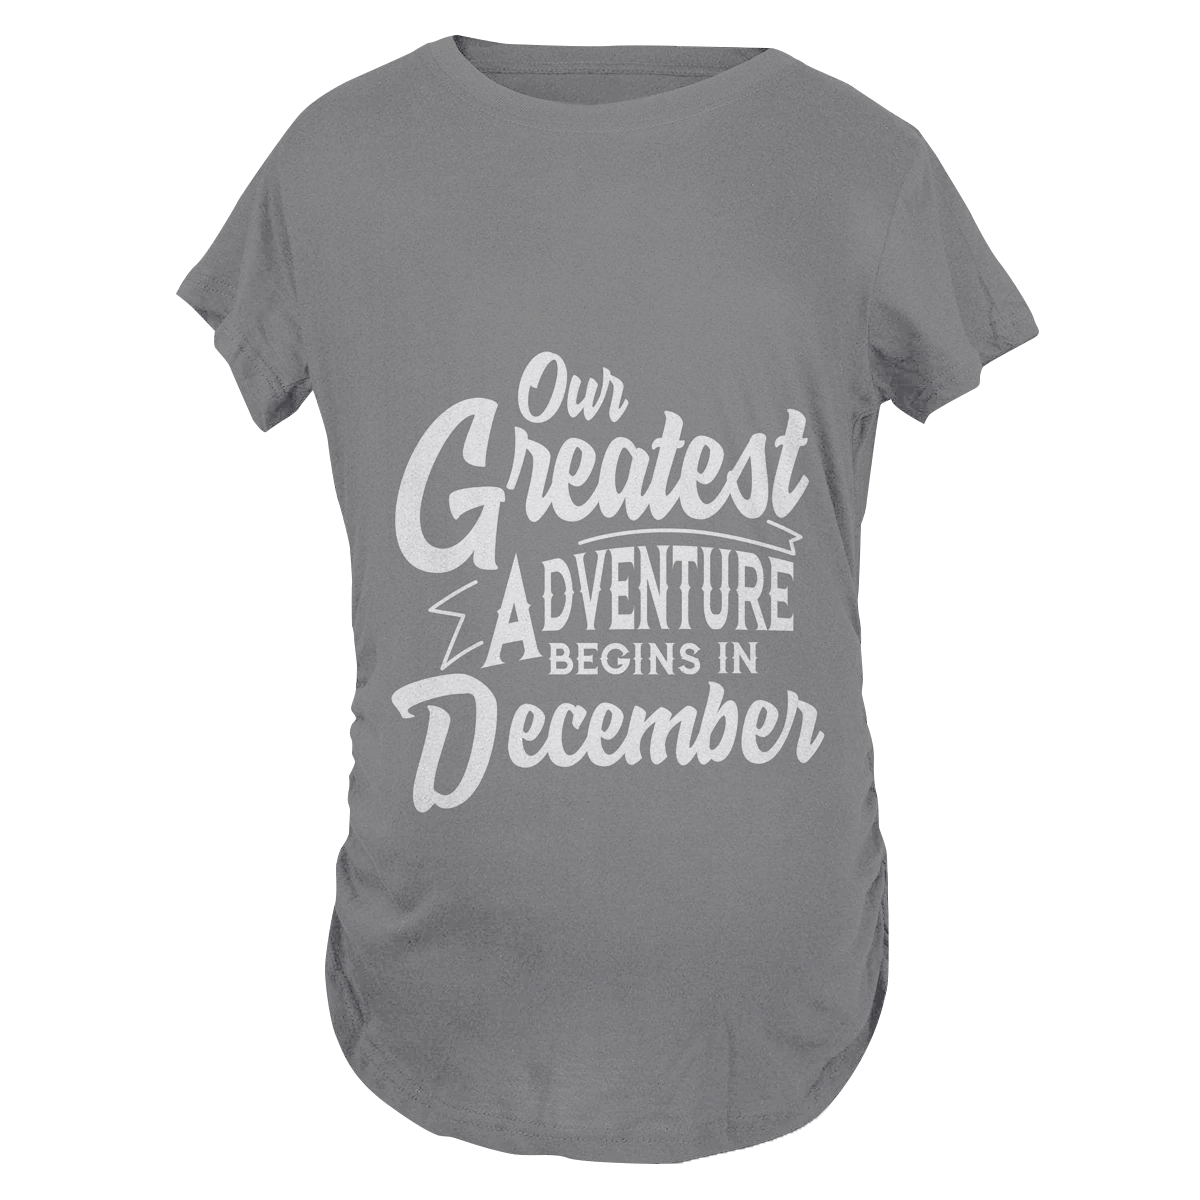 Our Greatest Adventure Begins in December Maternity T-Shirt